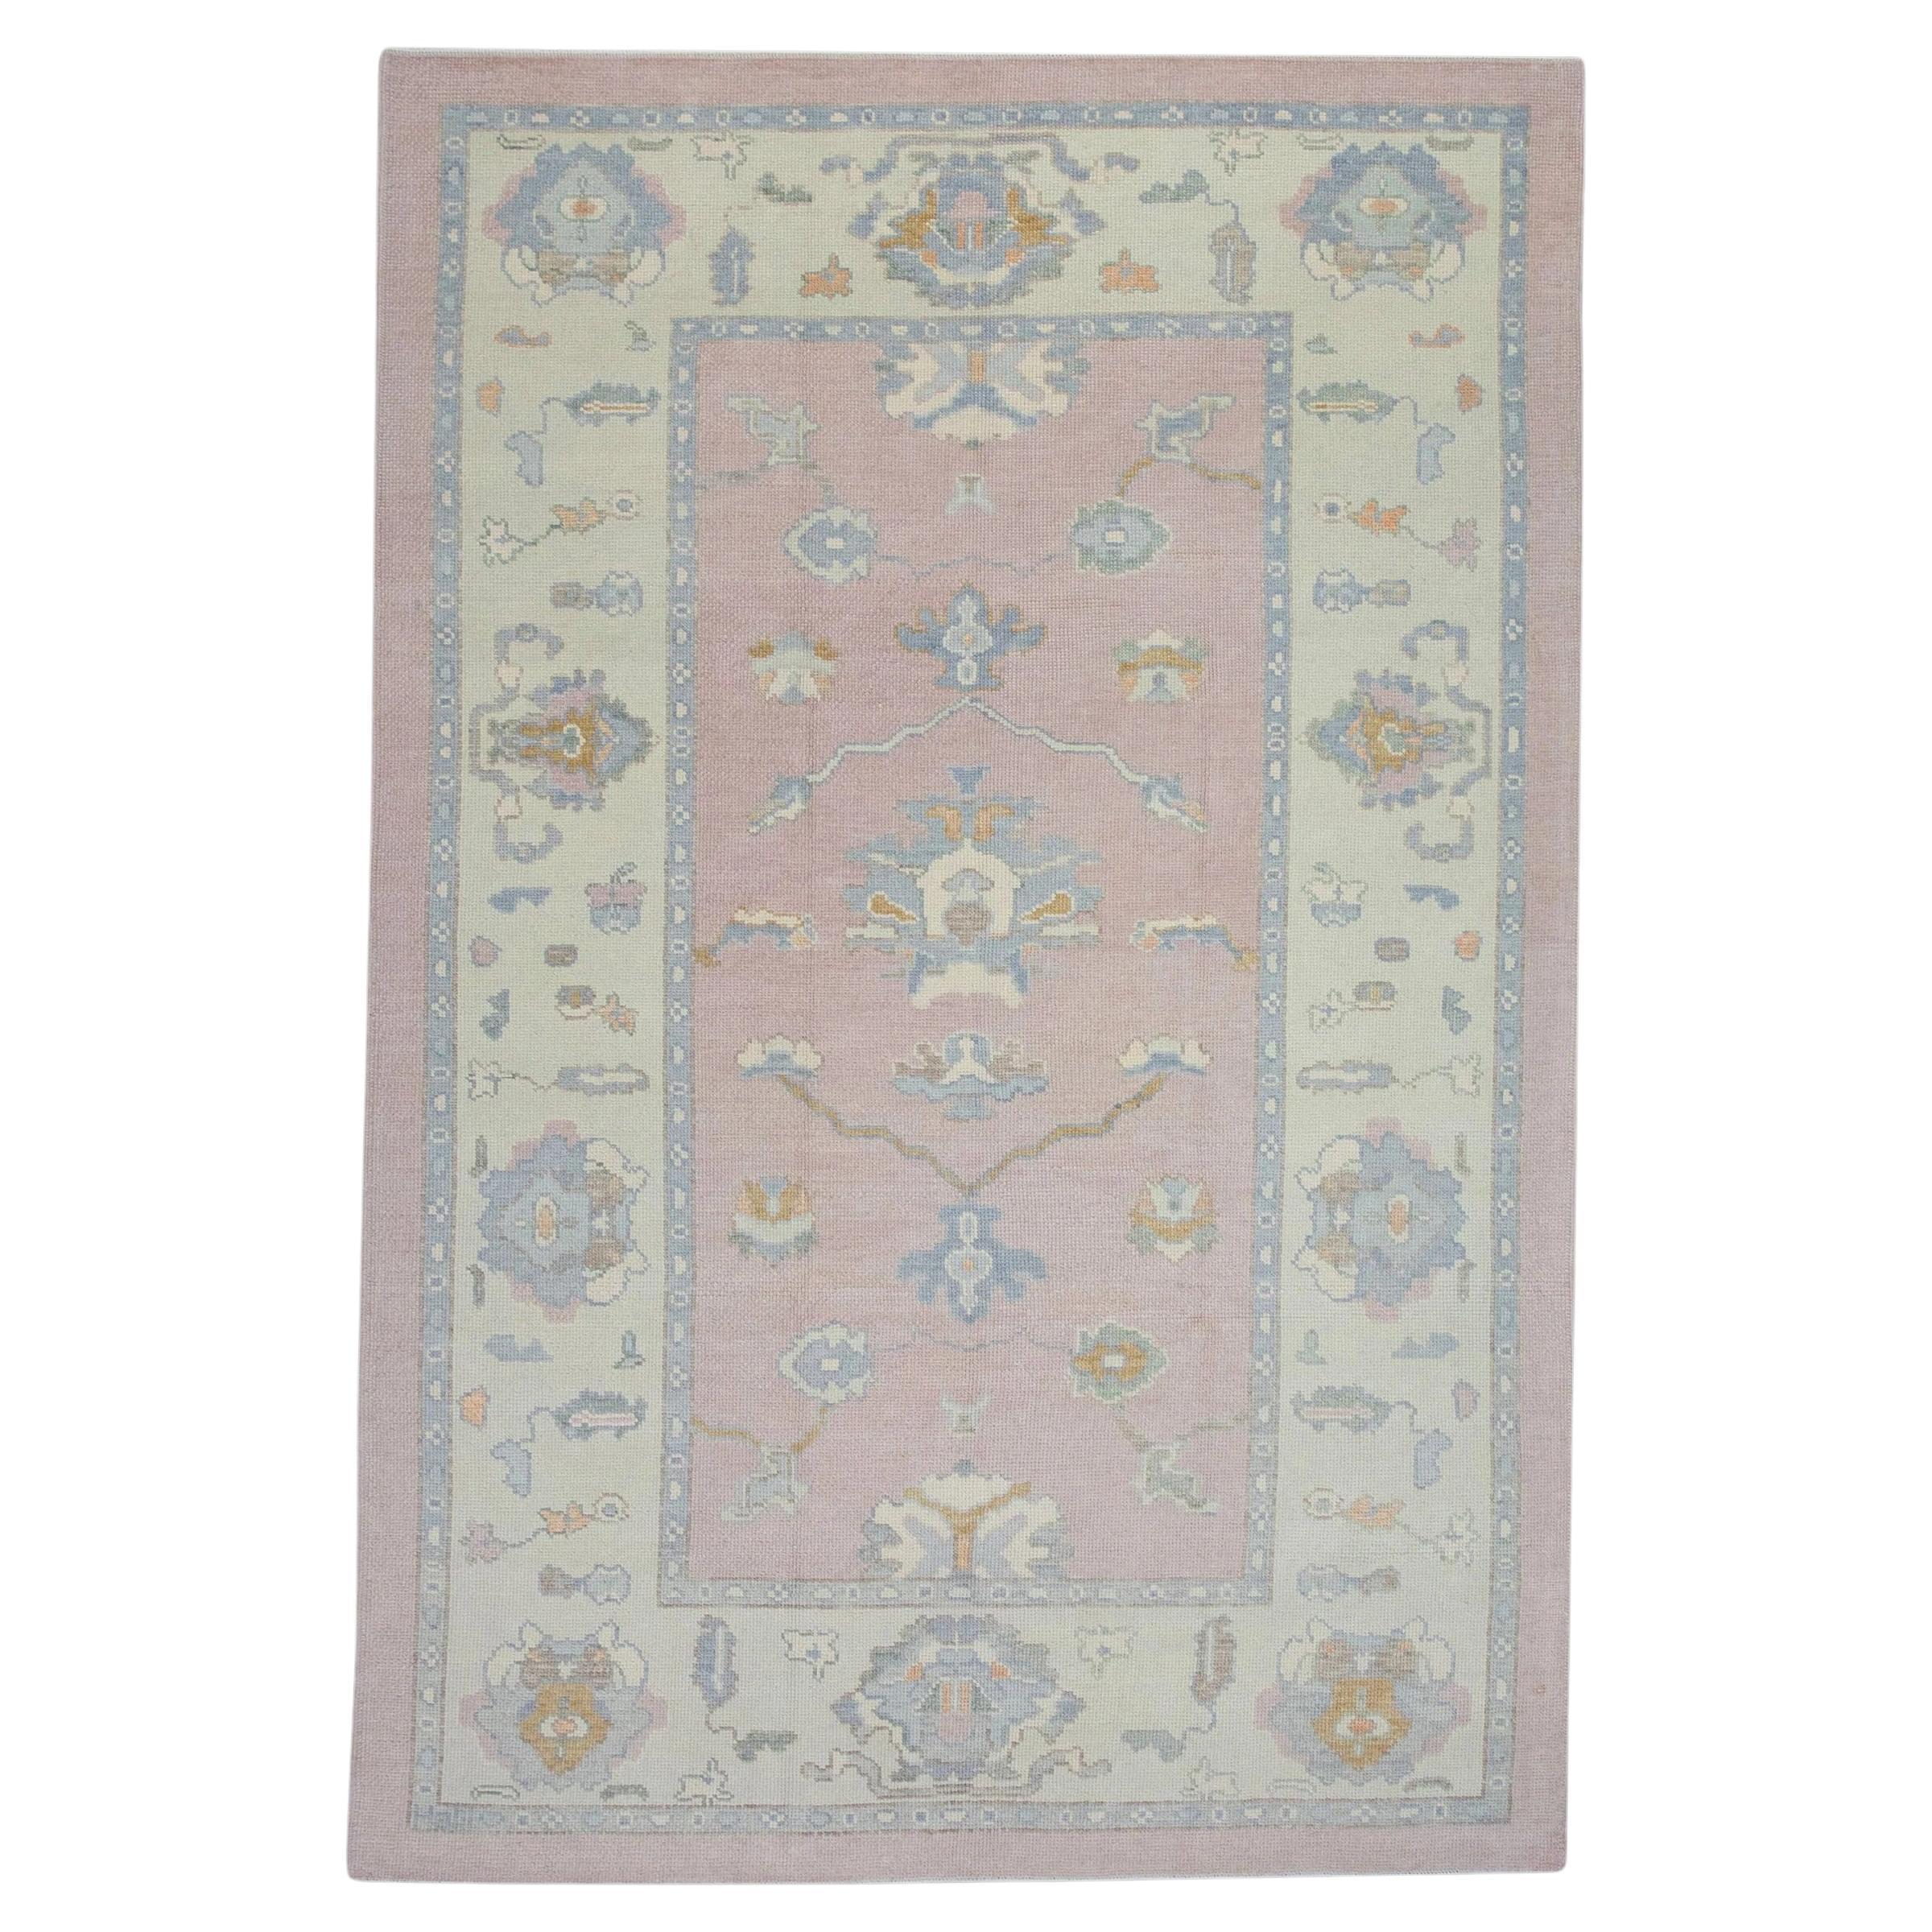 Pink and Blue Handwoven Wool Floral Design Turkish Oushak Rug 6'5" x 9'1" For Sale